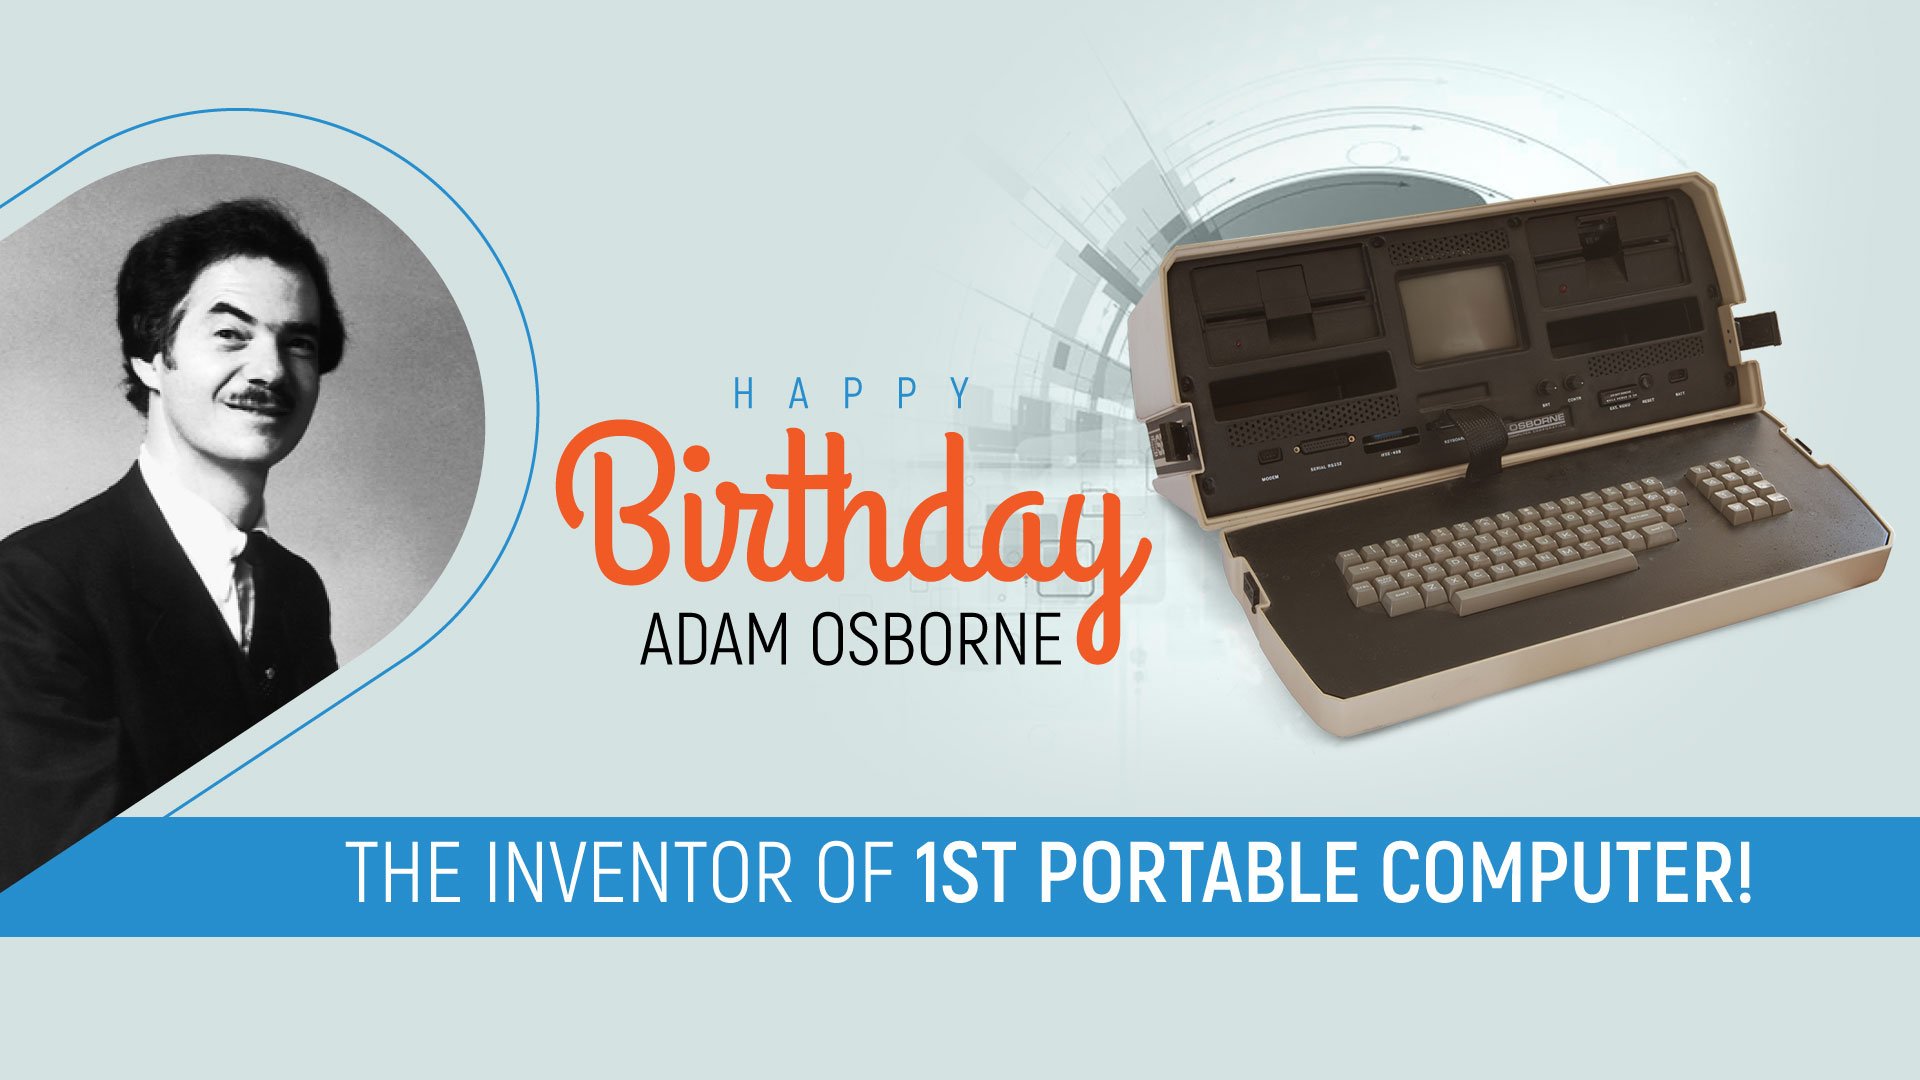 Contributions of Adam Osborne: The inventor of first portable computer